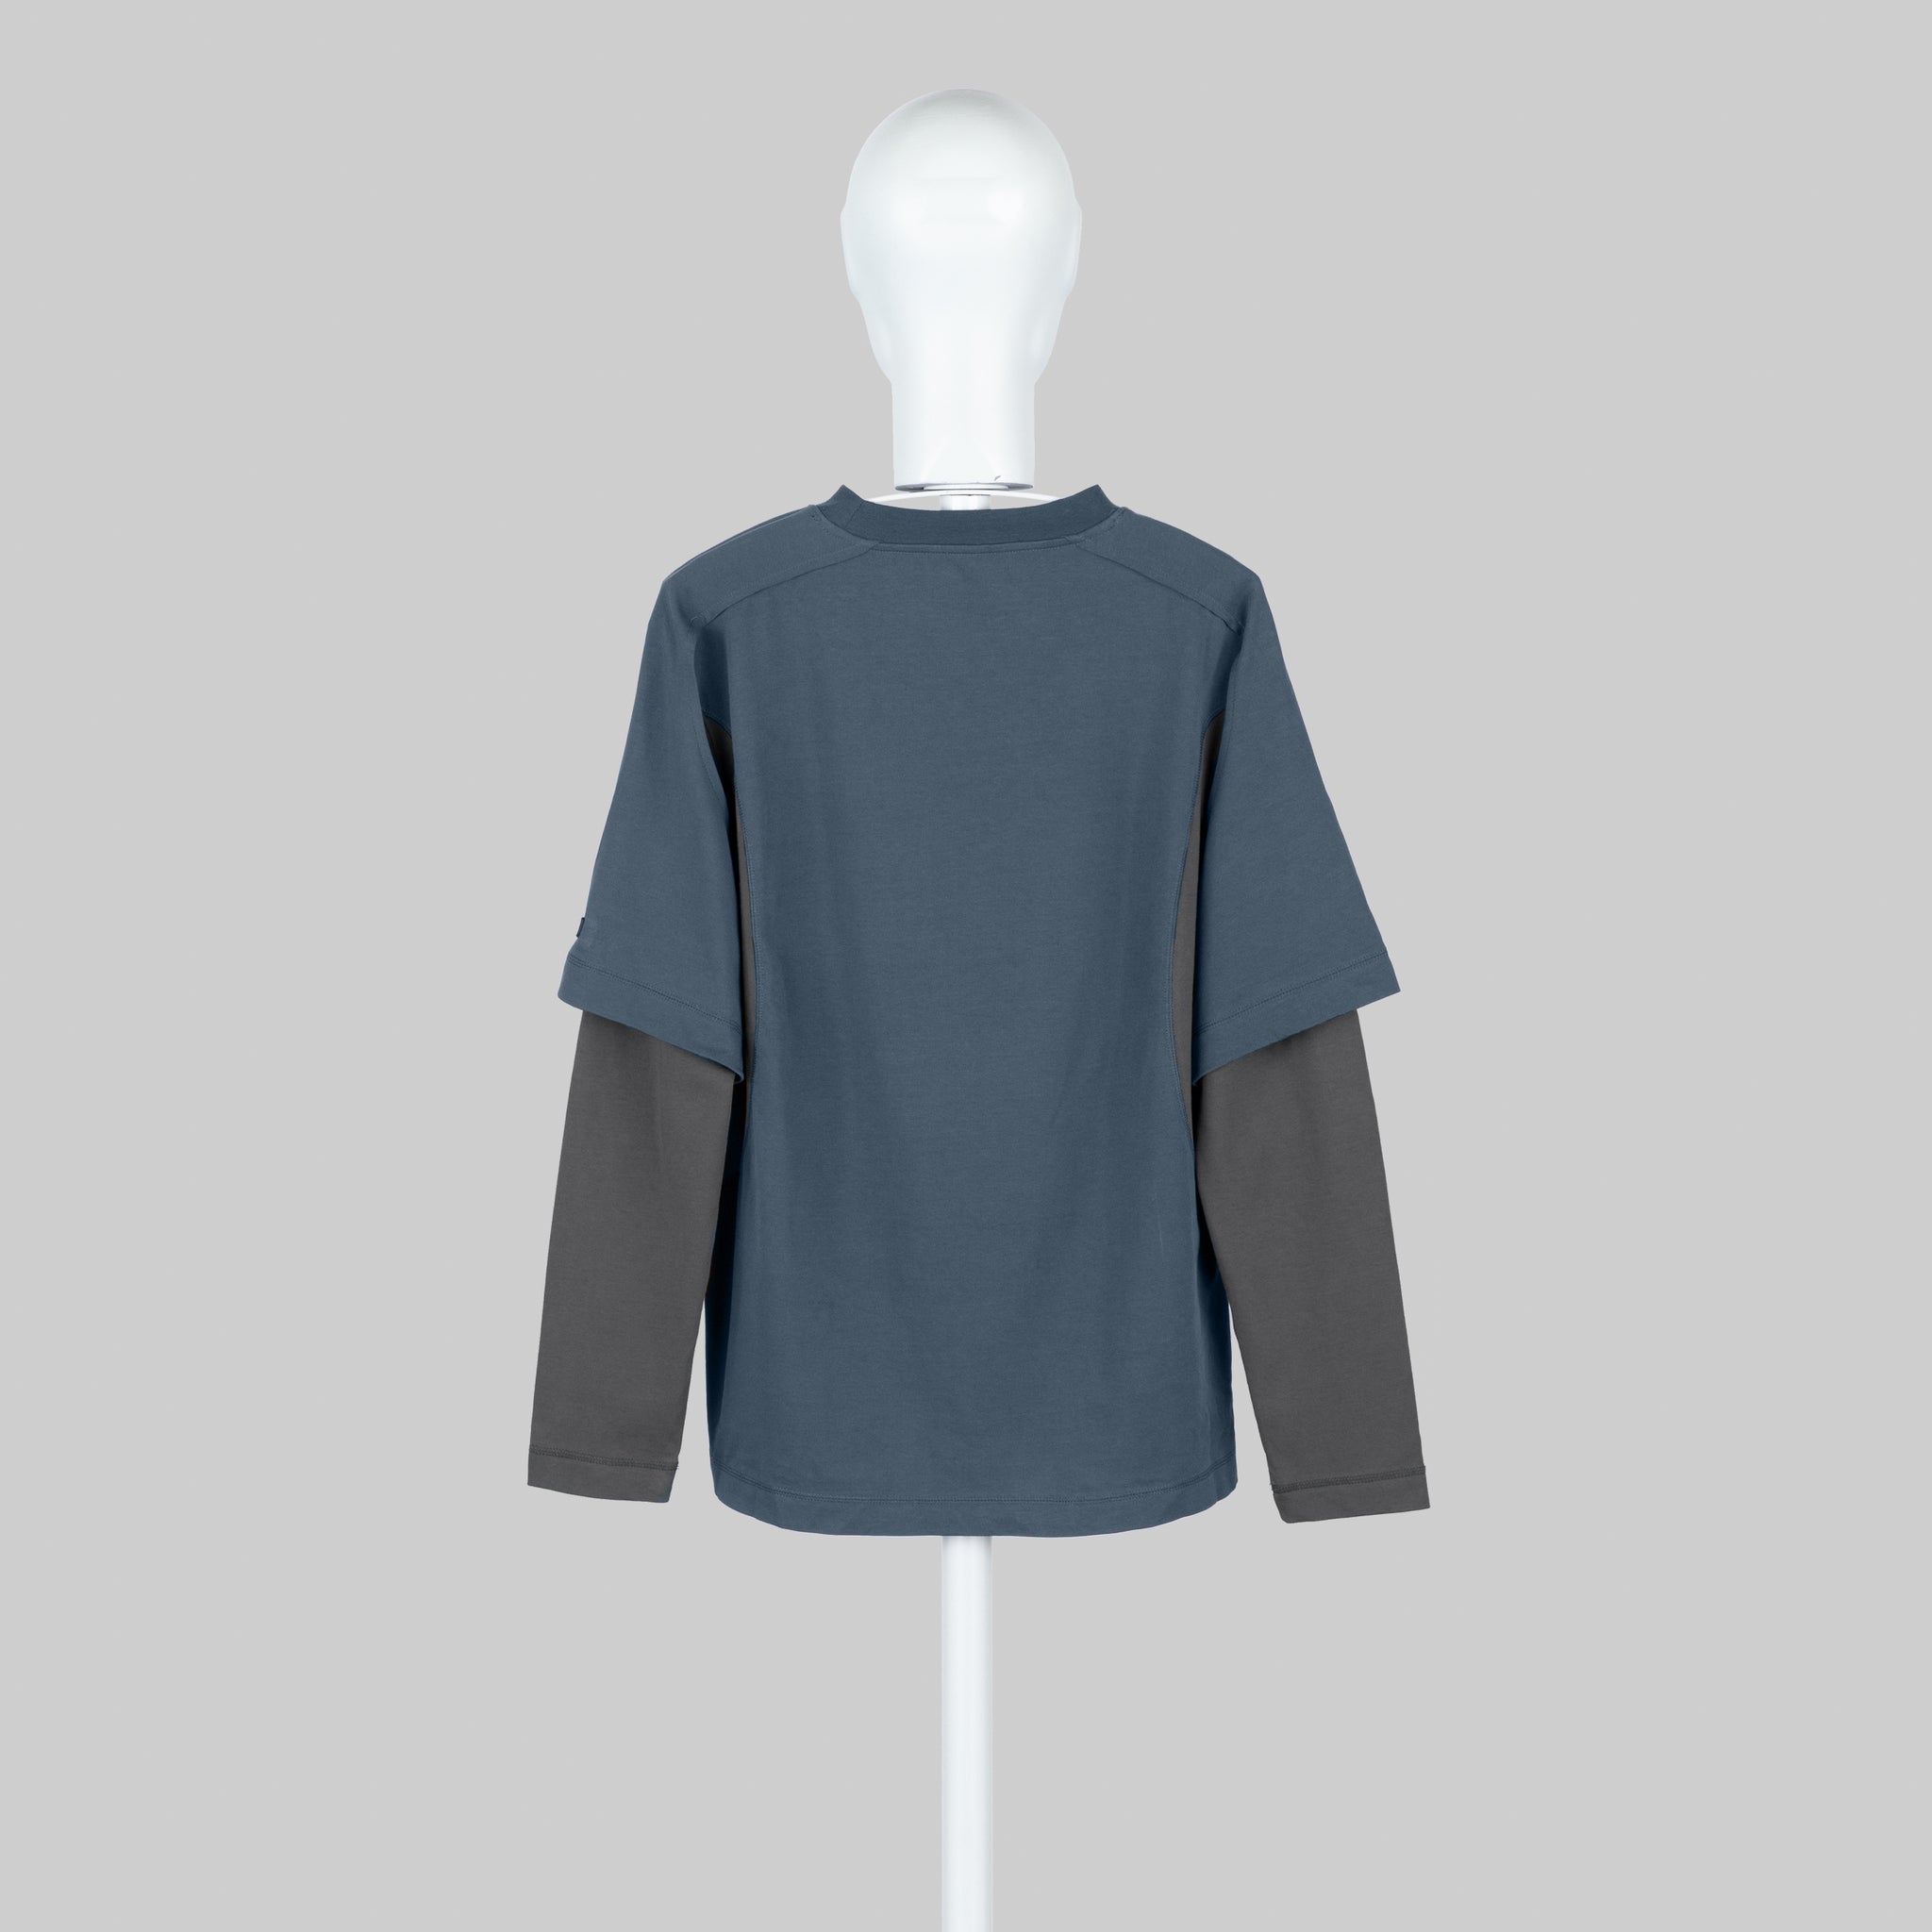 AFFXWRKS DUAL SLEEVE T-SHIRT MUTED BLUE